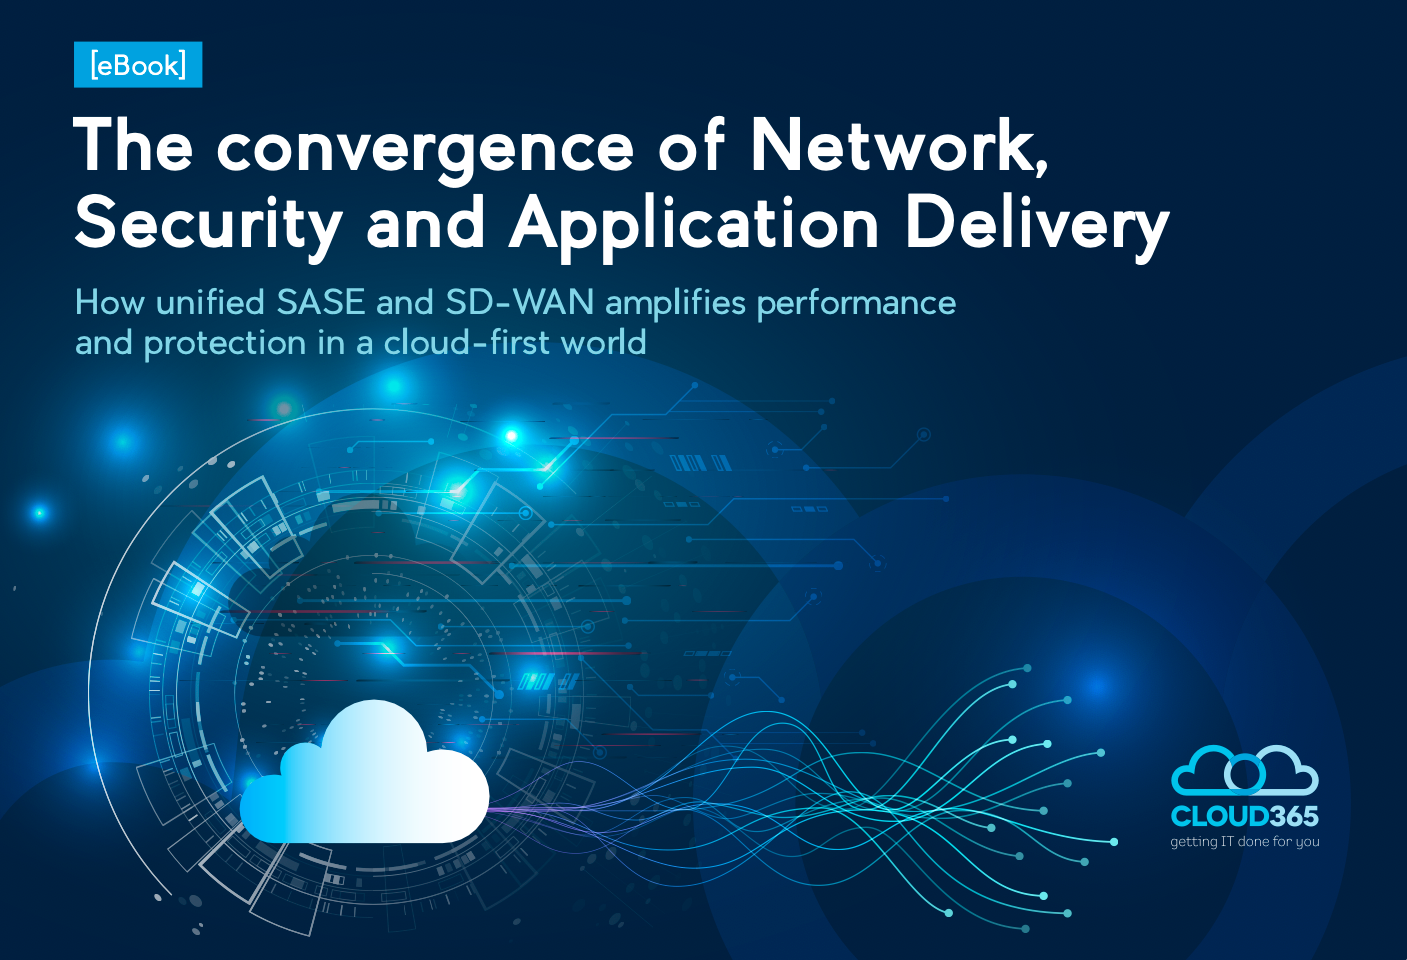 eBook: The Convergence of Network, Security and Application Delivery